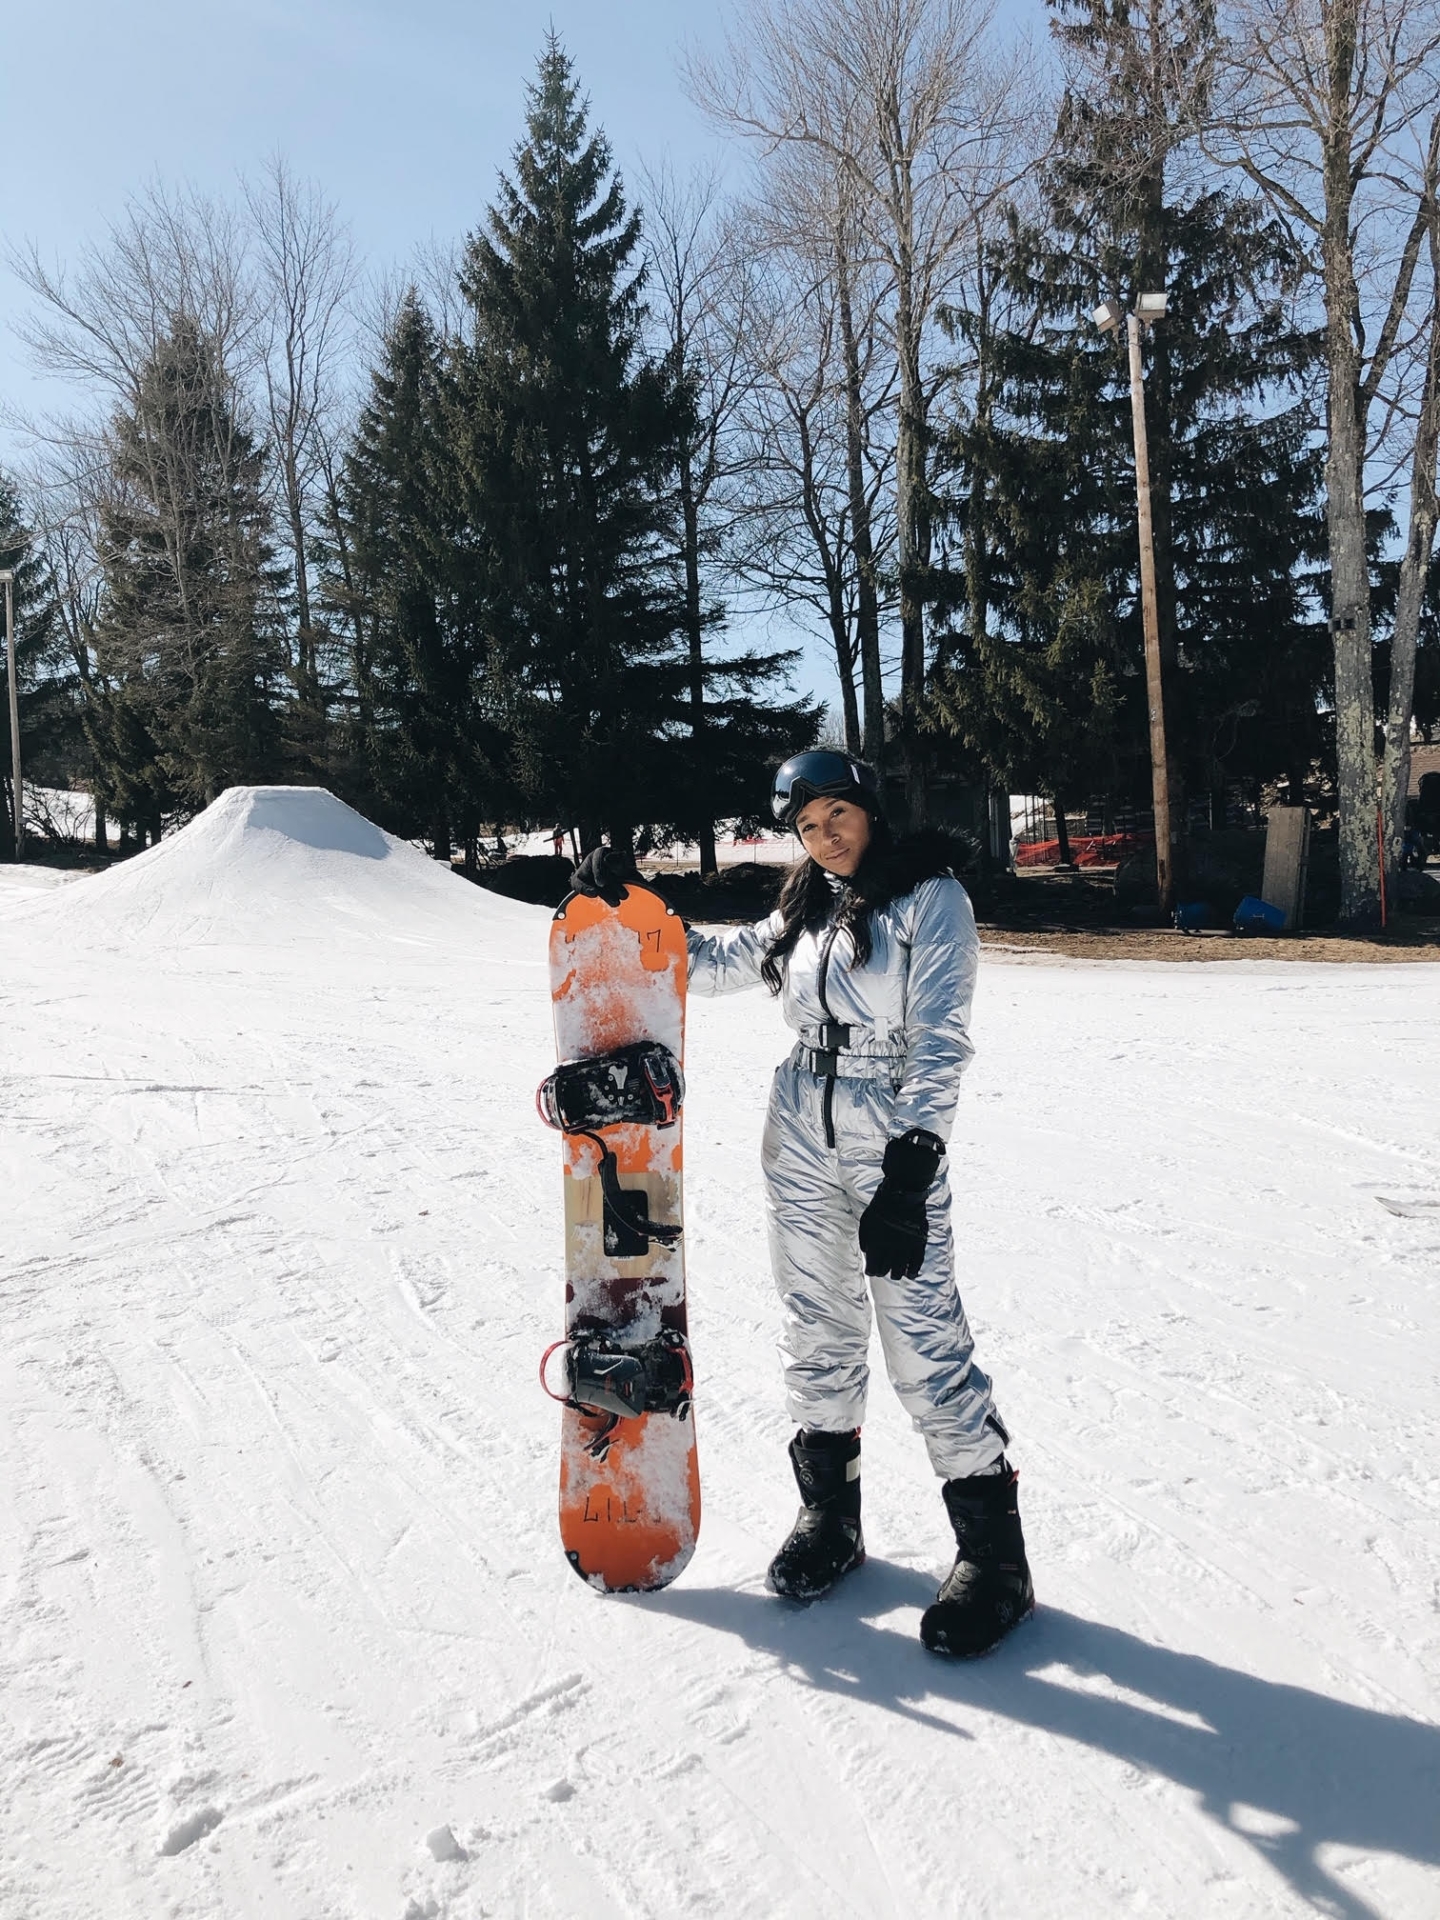 MY FIRST TIME SNOWBOARDING